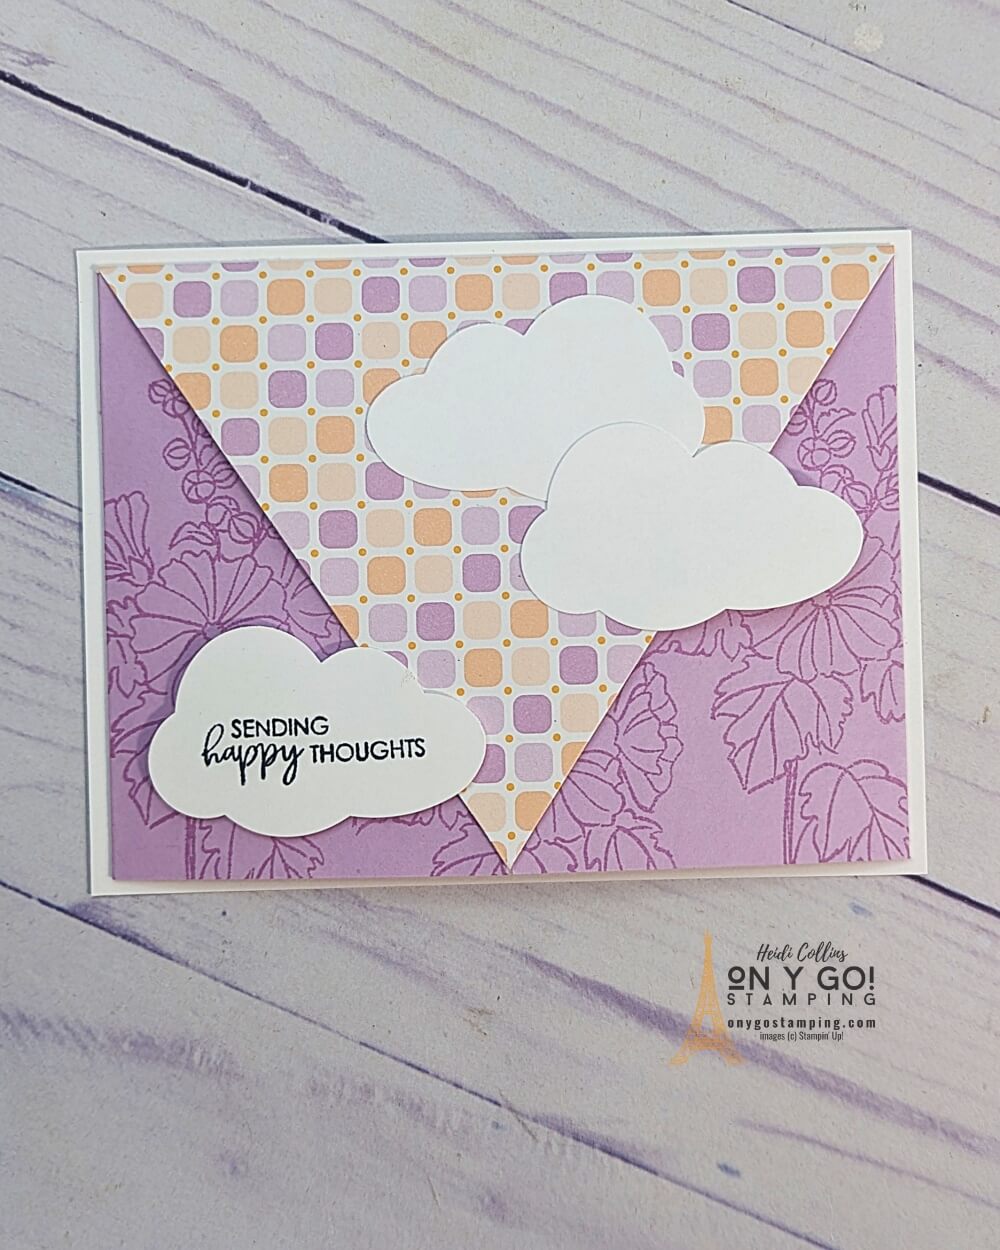 Fun fold card design with an envelope flap closure. This card uses the Dandy Designs patterned paper and Beautifully Happy stamp set from Stampin' Up! Get the free downloadable quick reference guide.